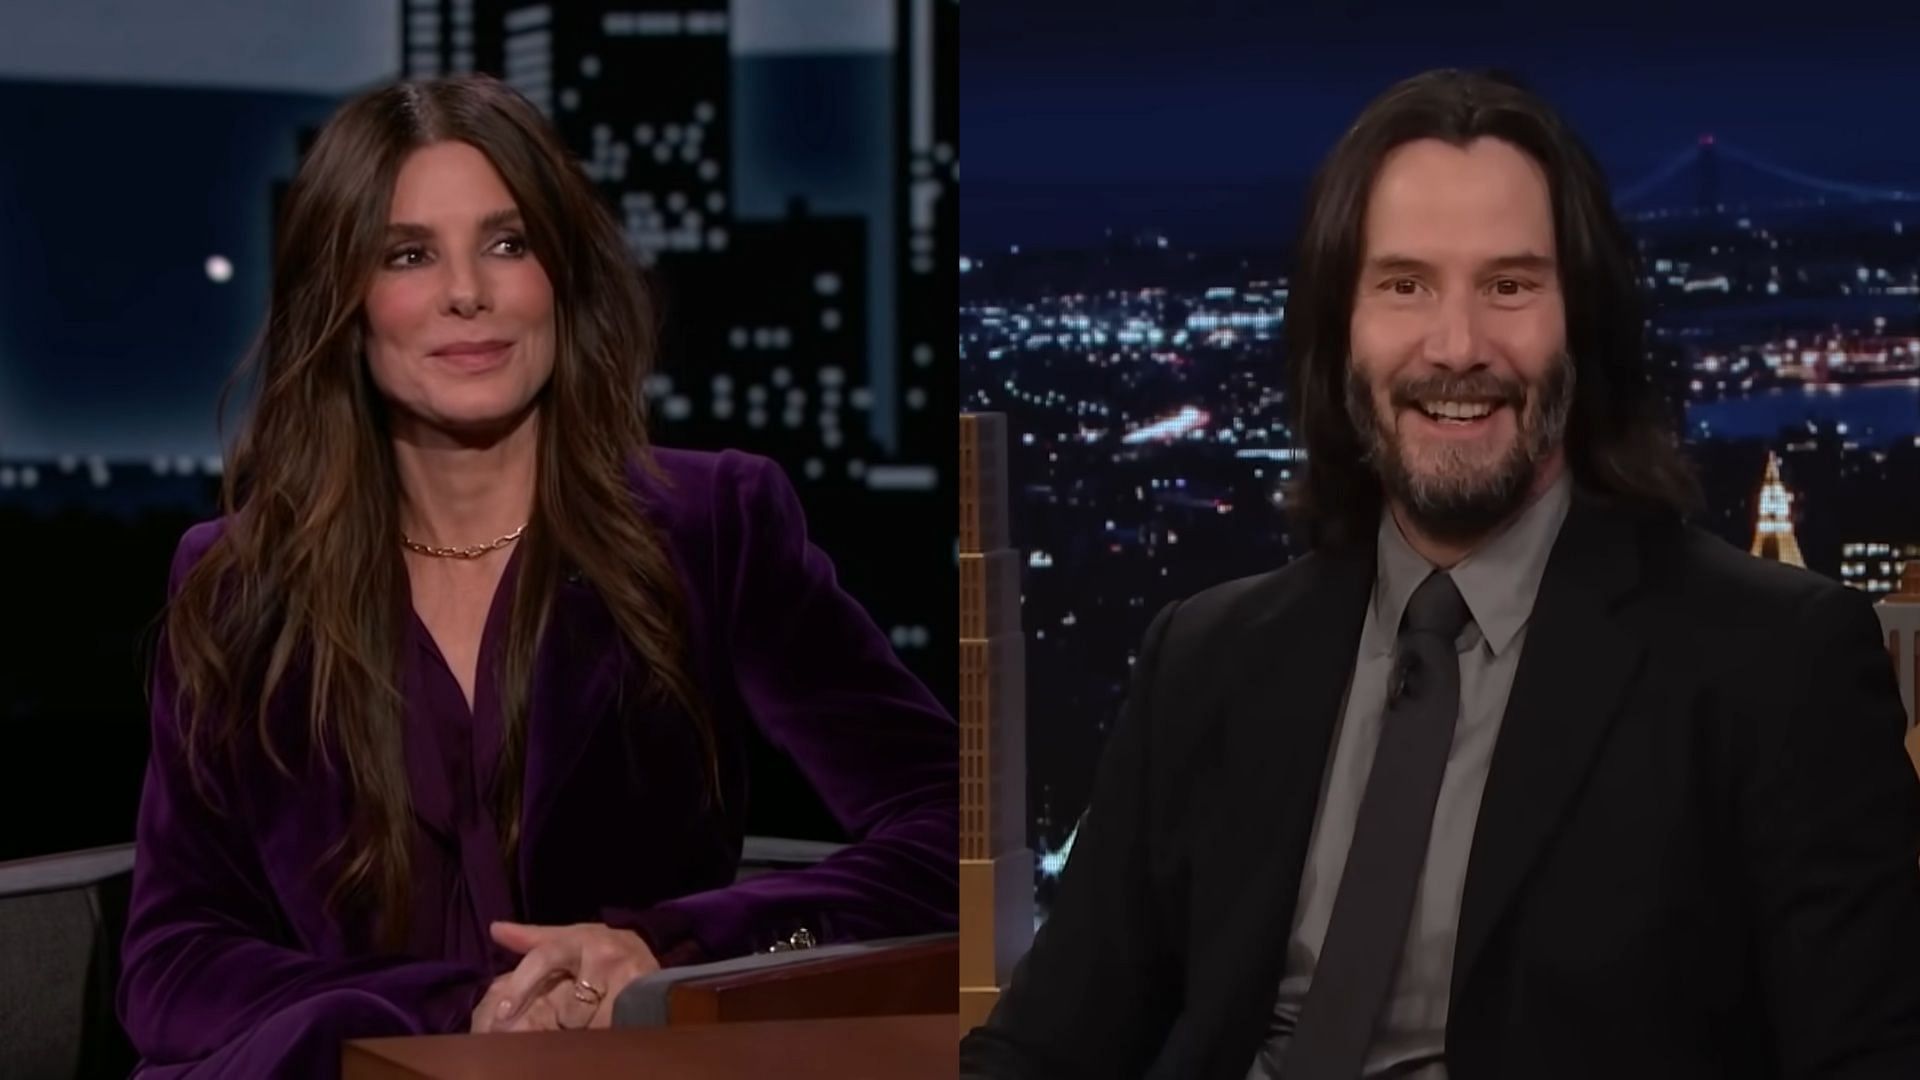 Keanu Reeves and Sandra Bullock expressed interest in working with each other again (Image via Jimmy Kimmel Live, The Tonight Show Starring Jimmy Fallon)